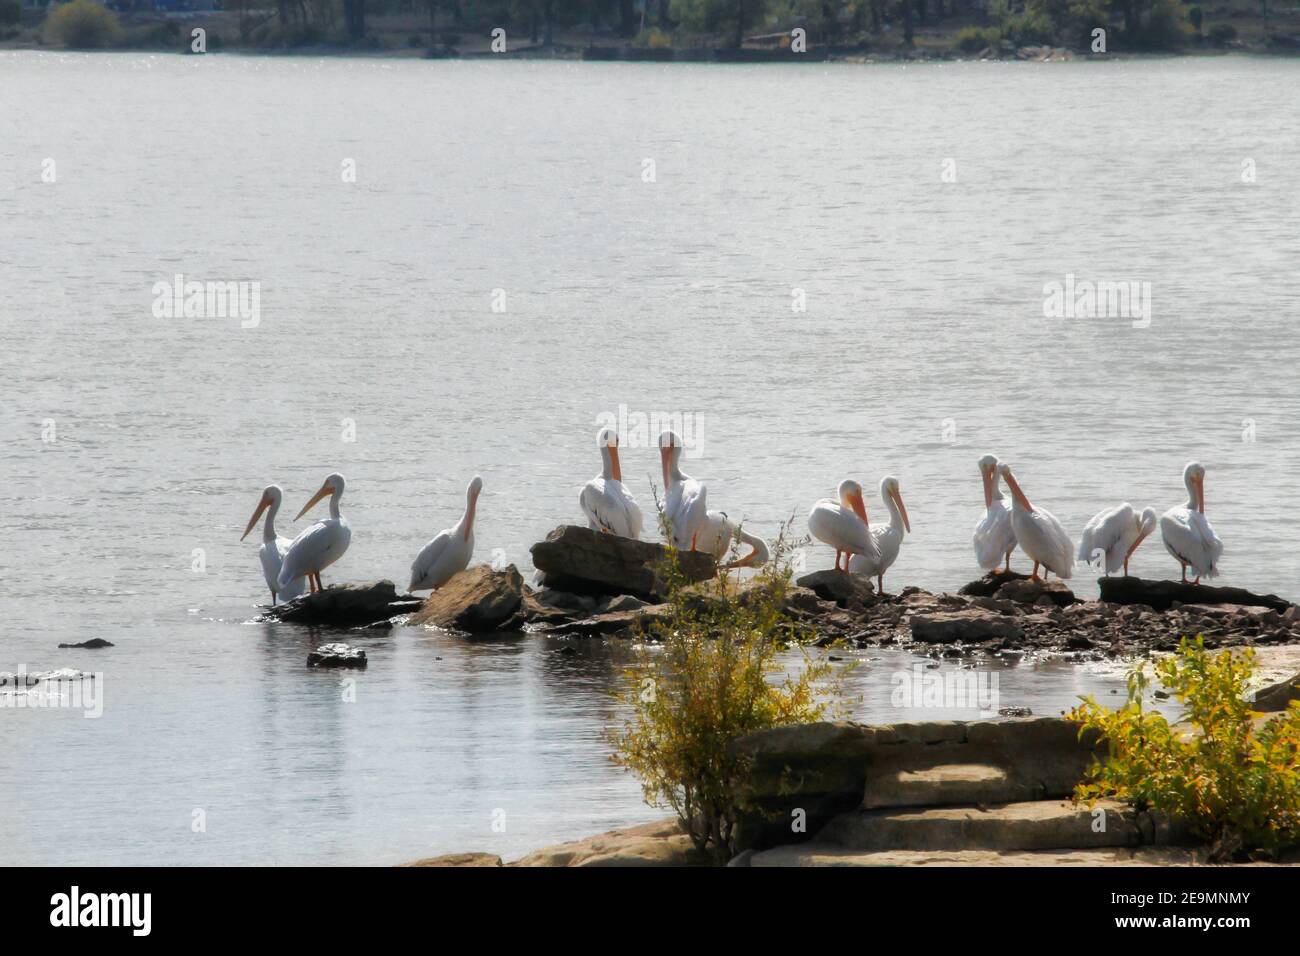 A flock of pelicans sit on rocks in Grand Lake sunning and preening during the annual autumn Pelican Festival in Grove Oklahoma. Stock Photo